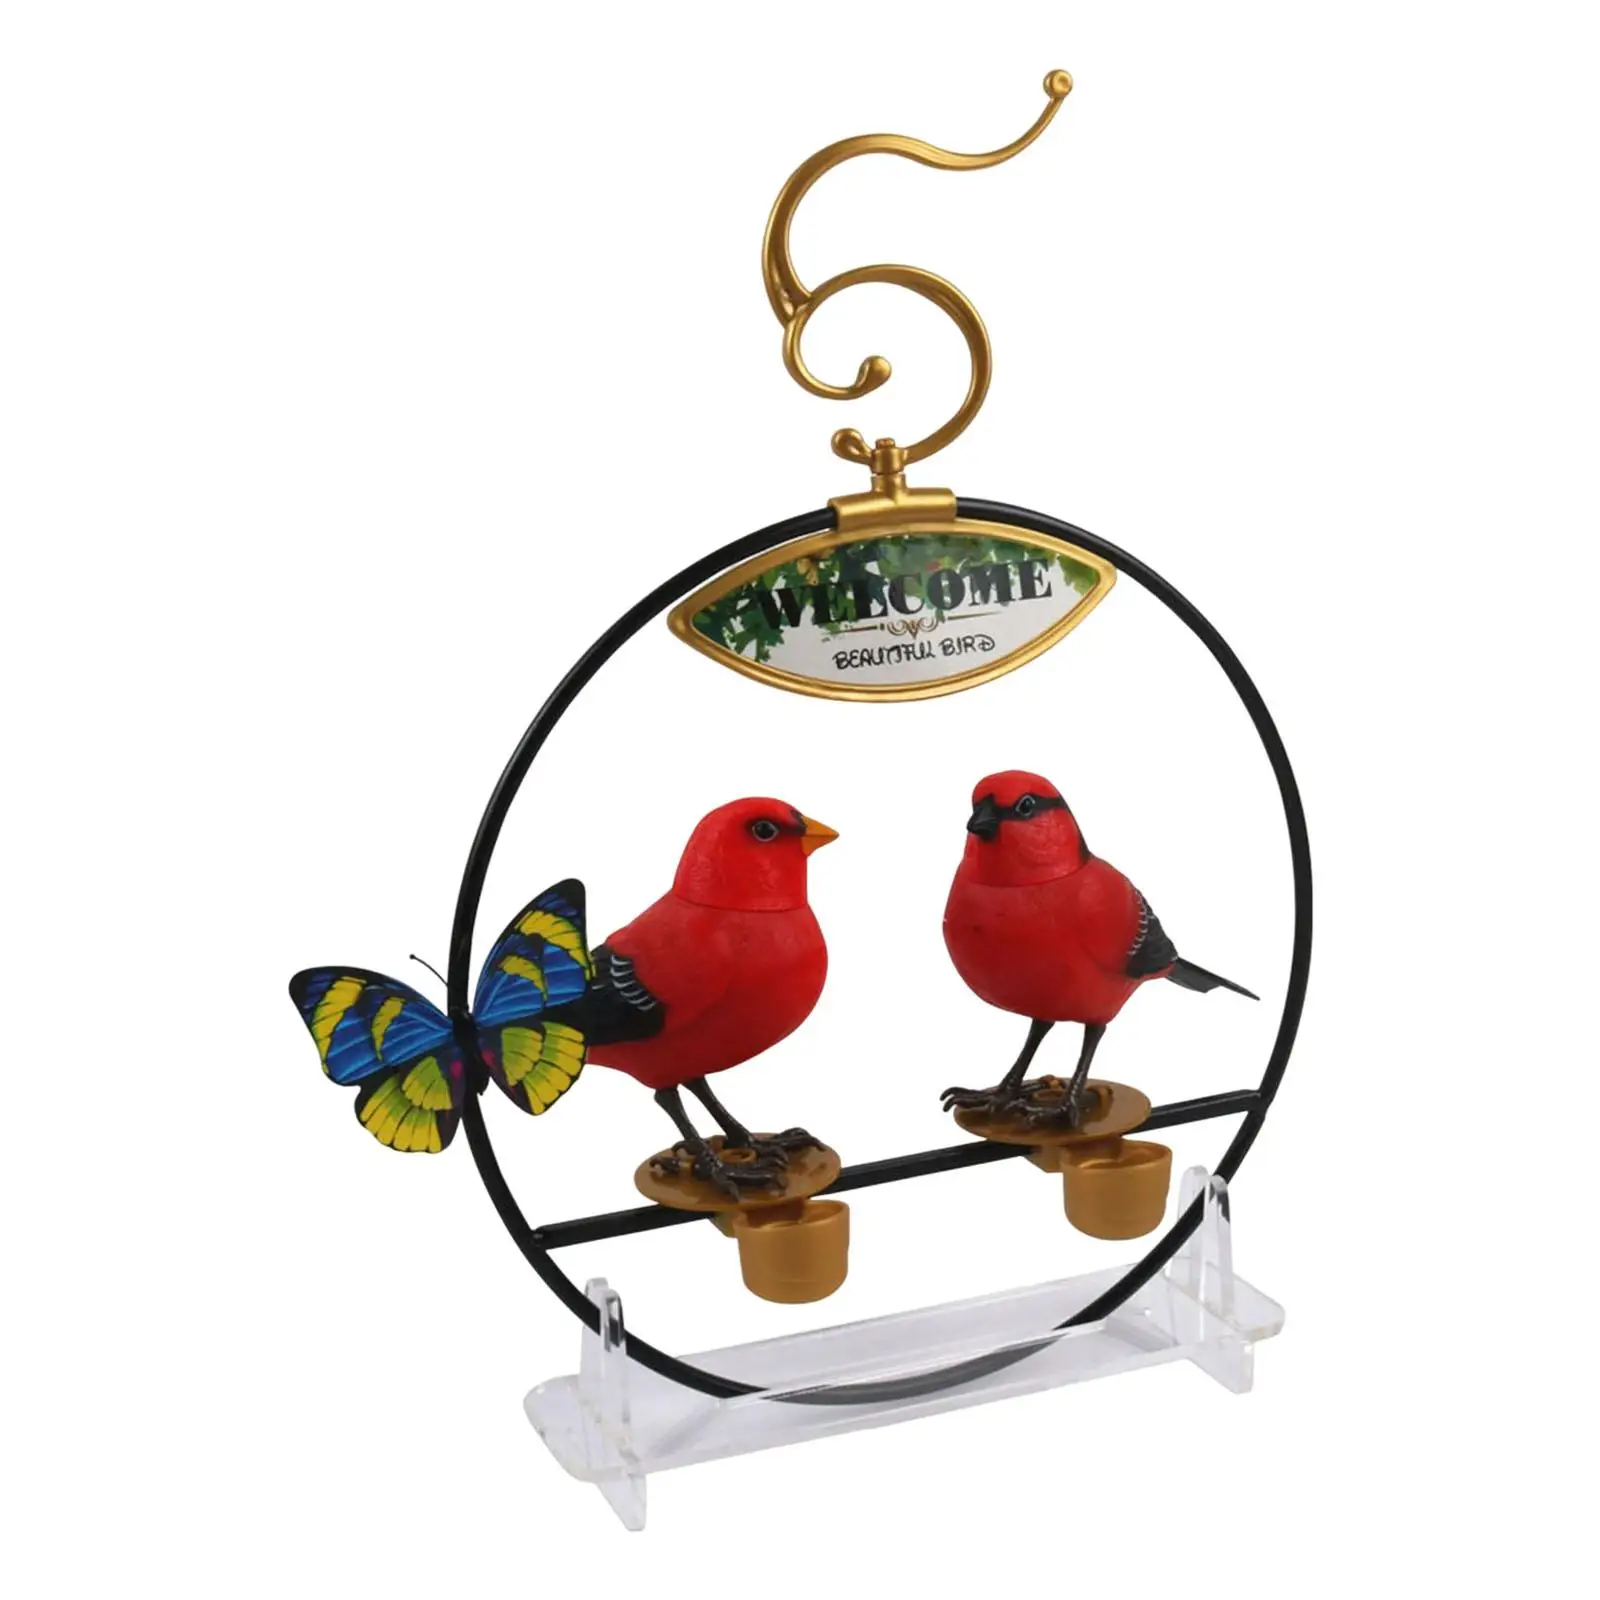 Adorable Chirping Dancing Parrots Bird with Sound Sensor Sound Activated Chirping Bird Kids Toy Gift Home Decoration